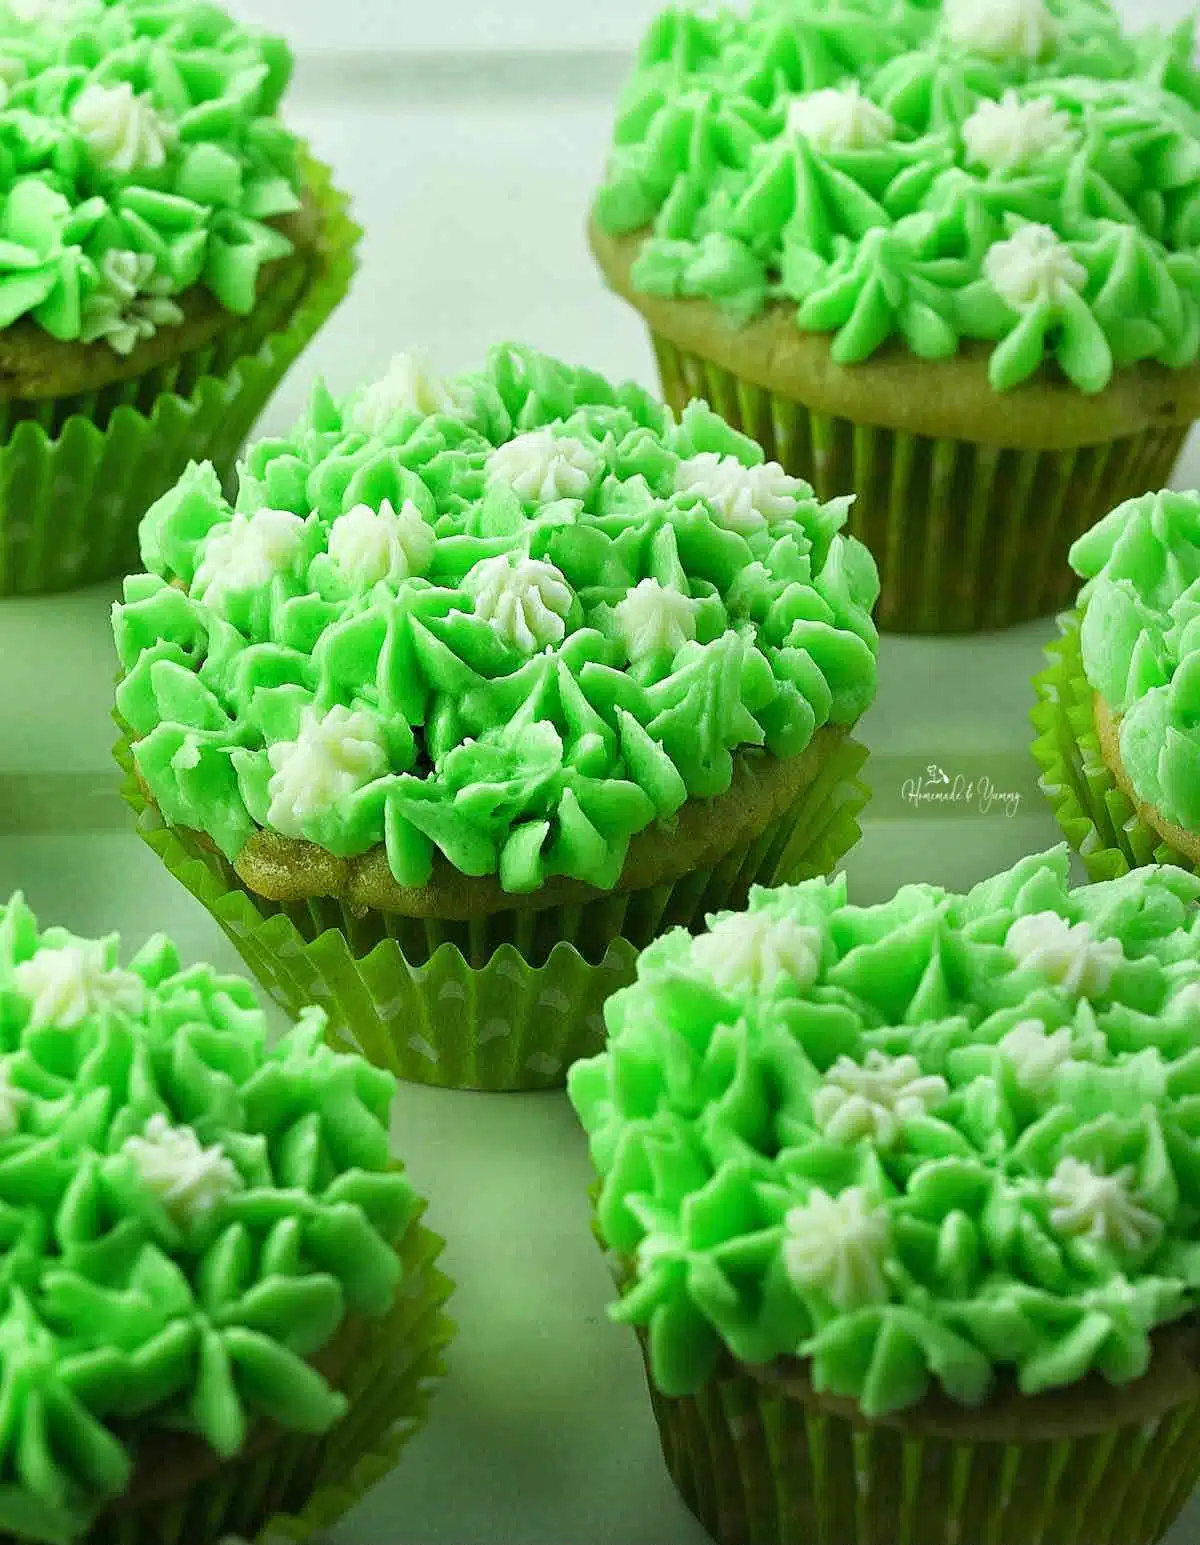 Green Tea Cupcakes from a cake mix.